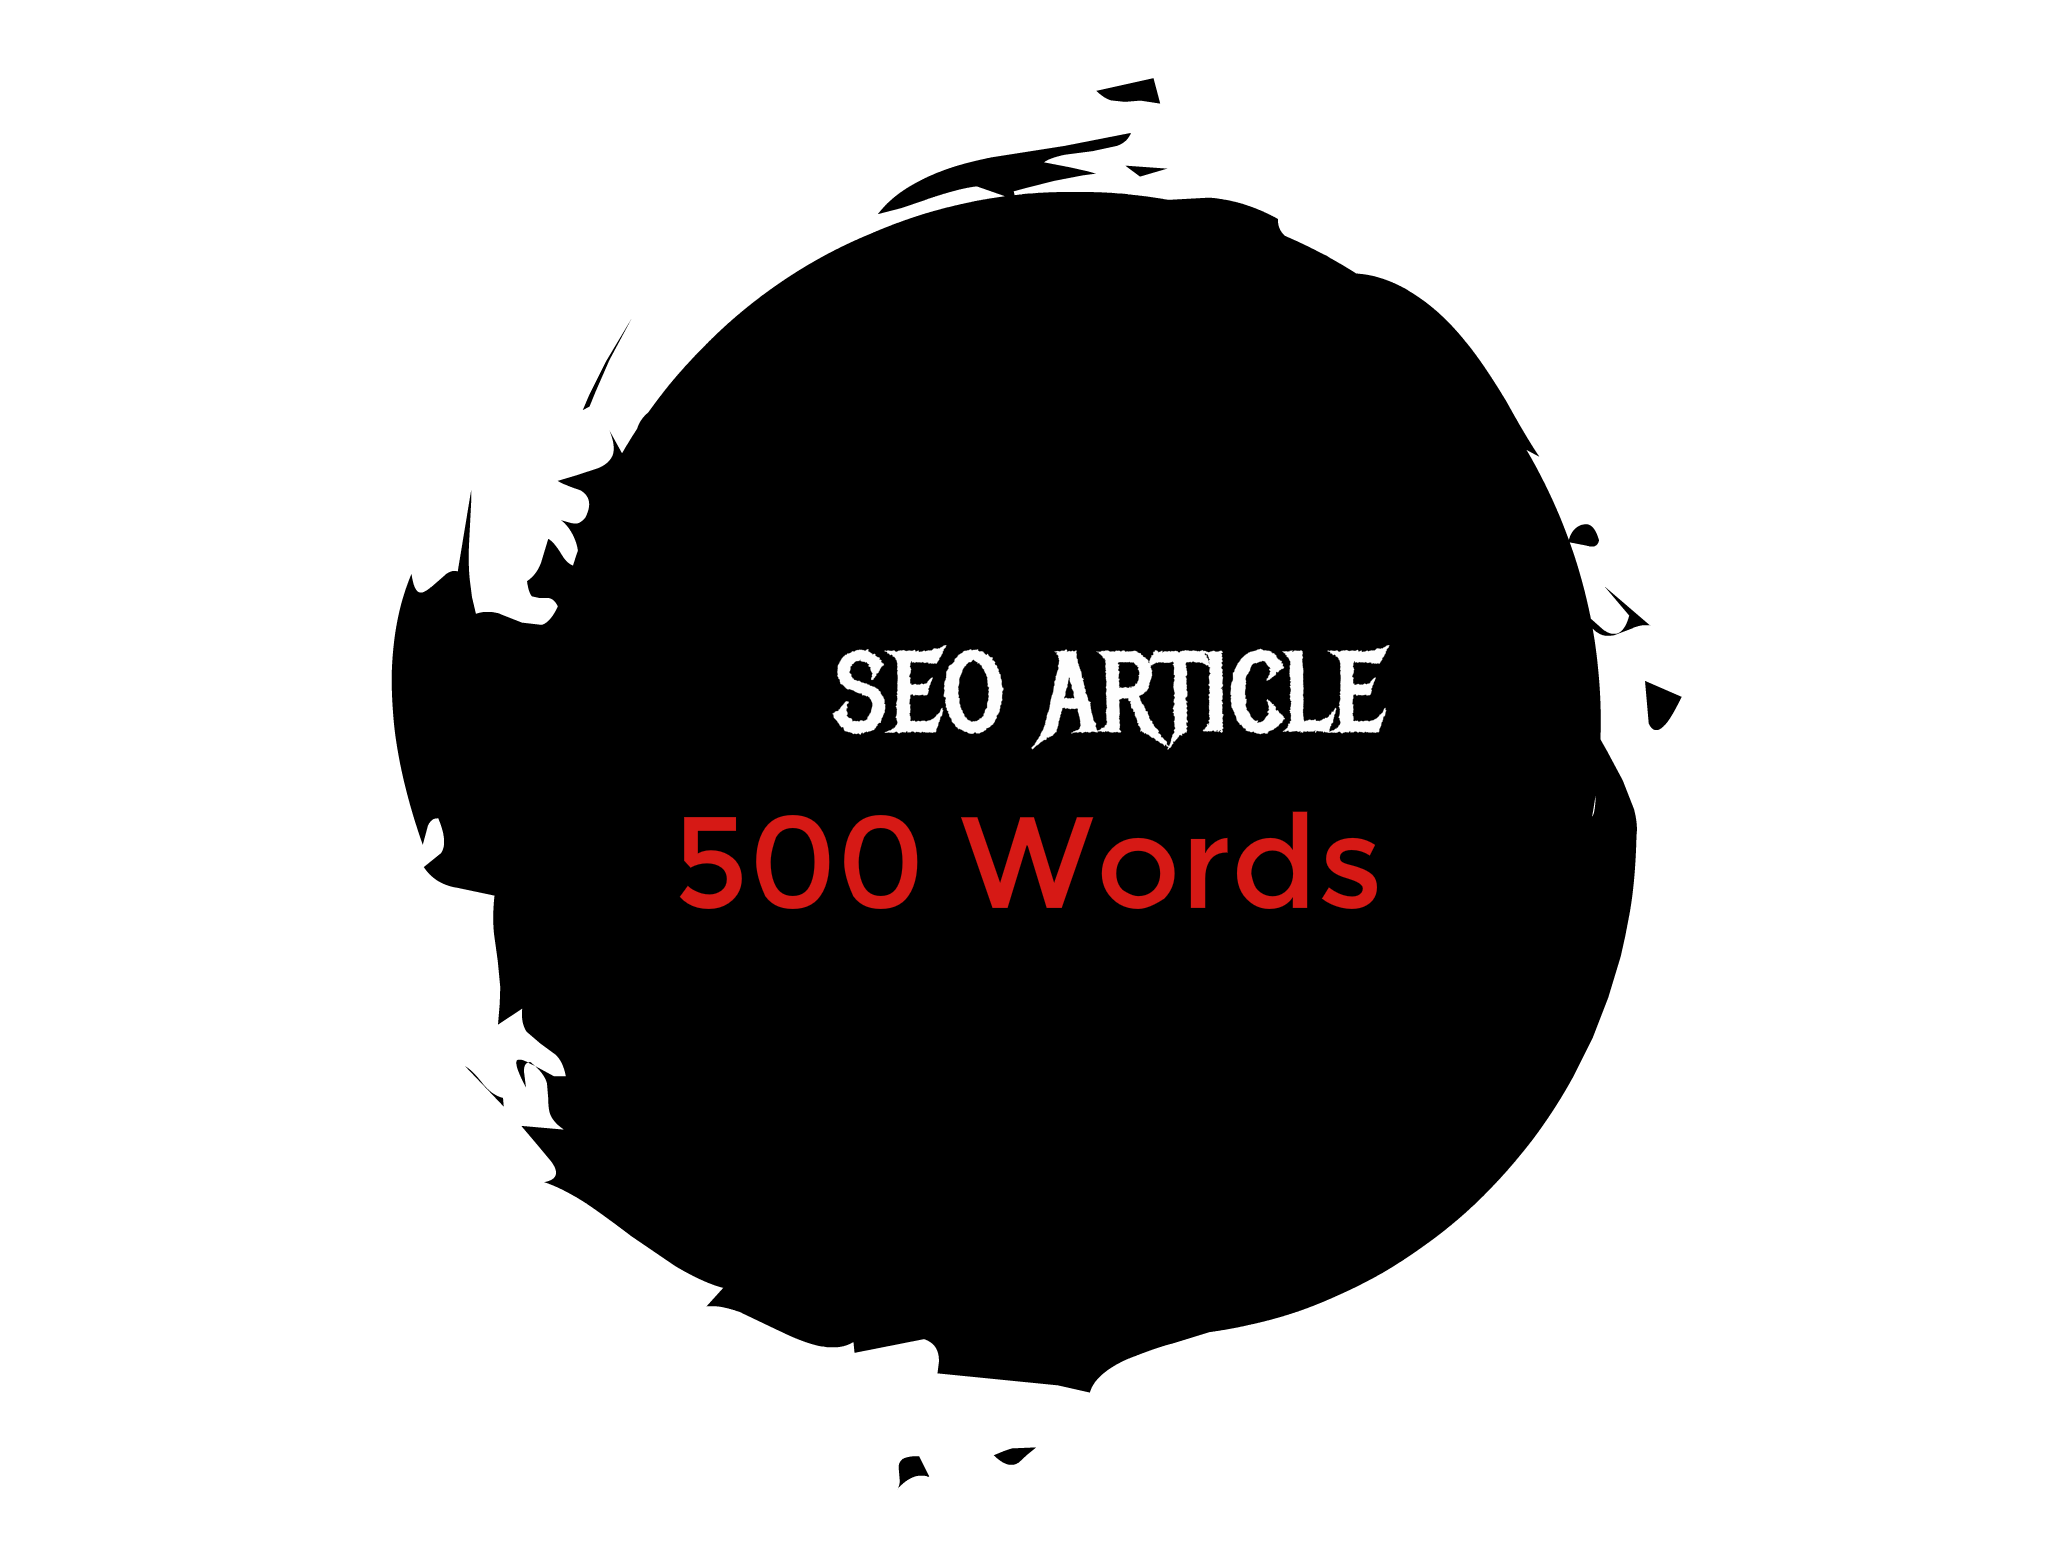 SEO Article 500 Words